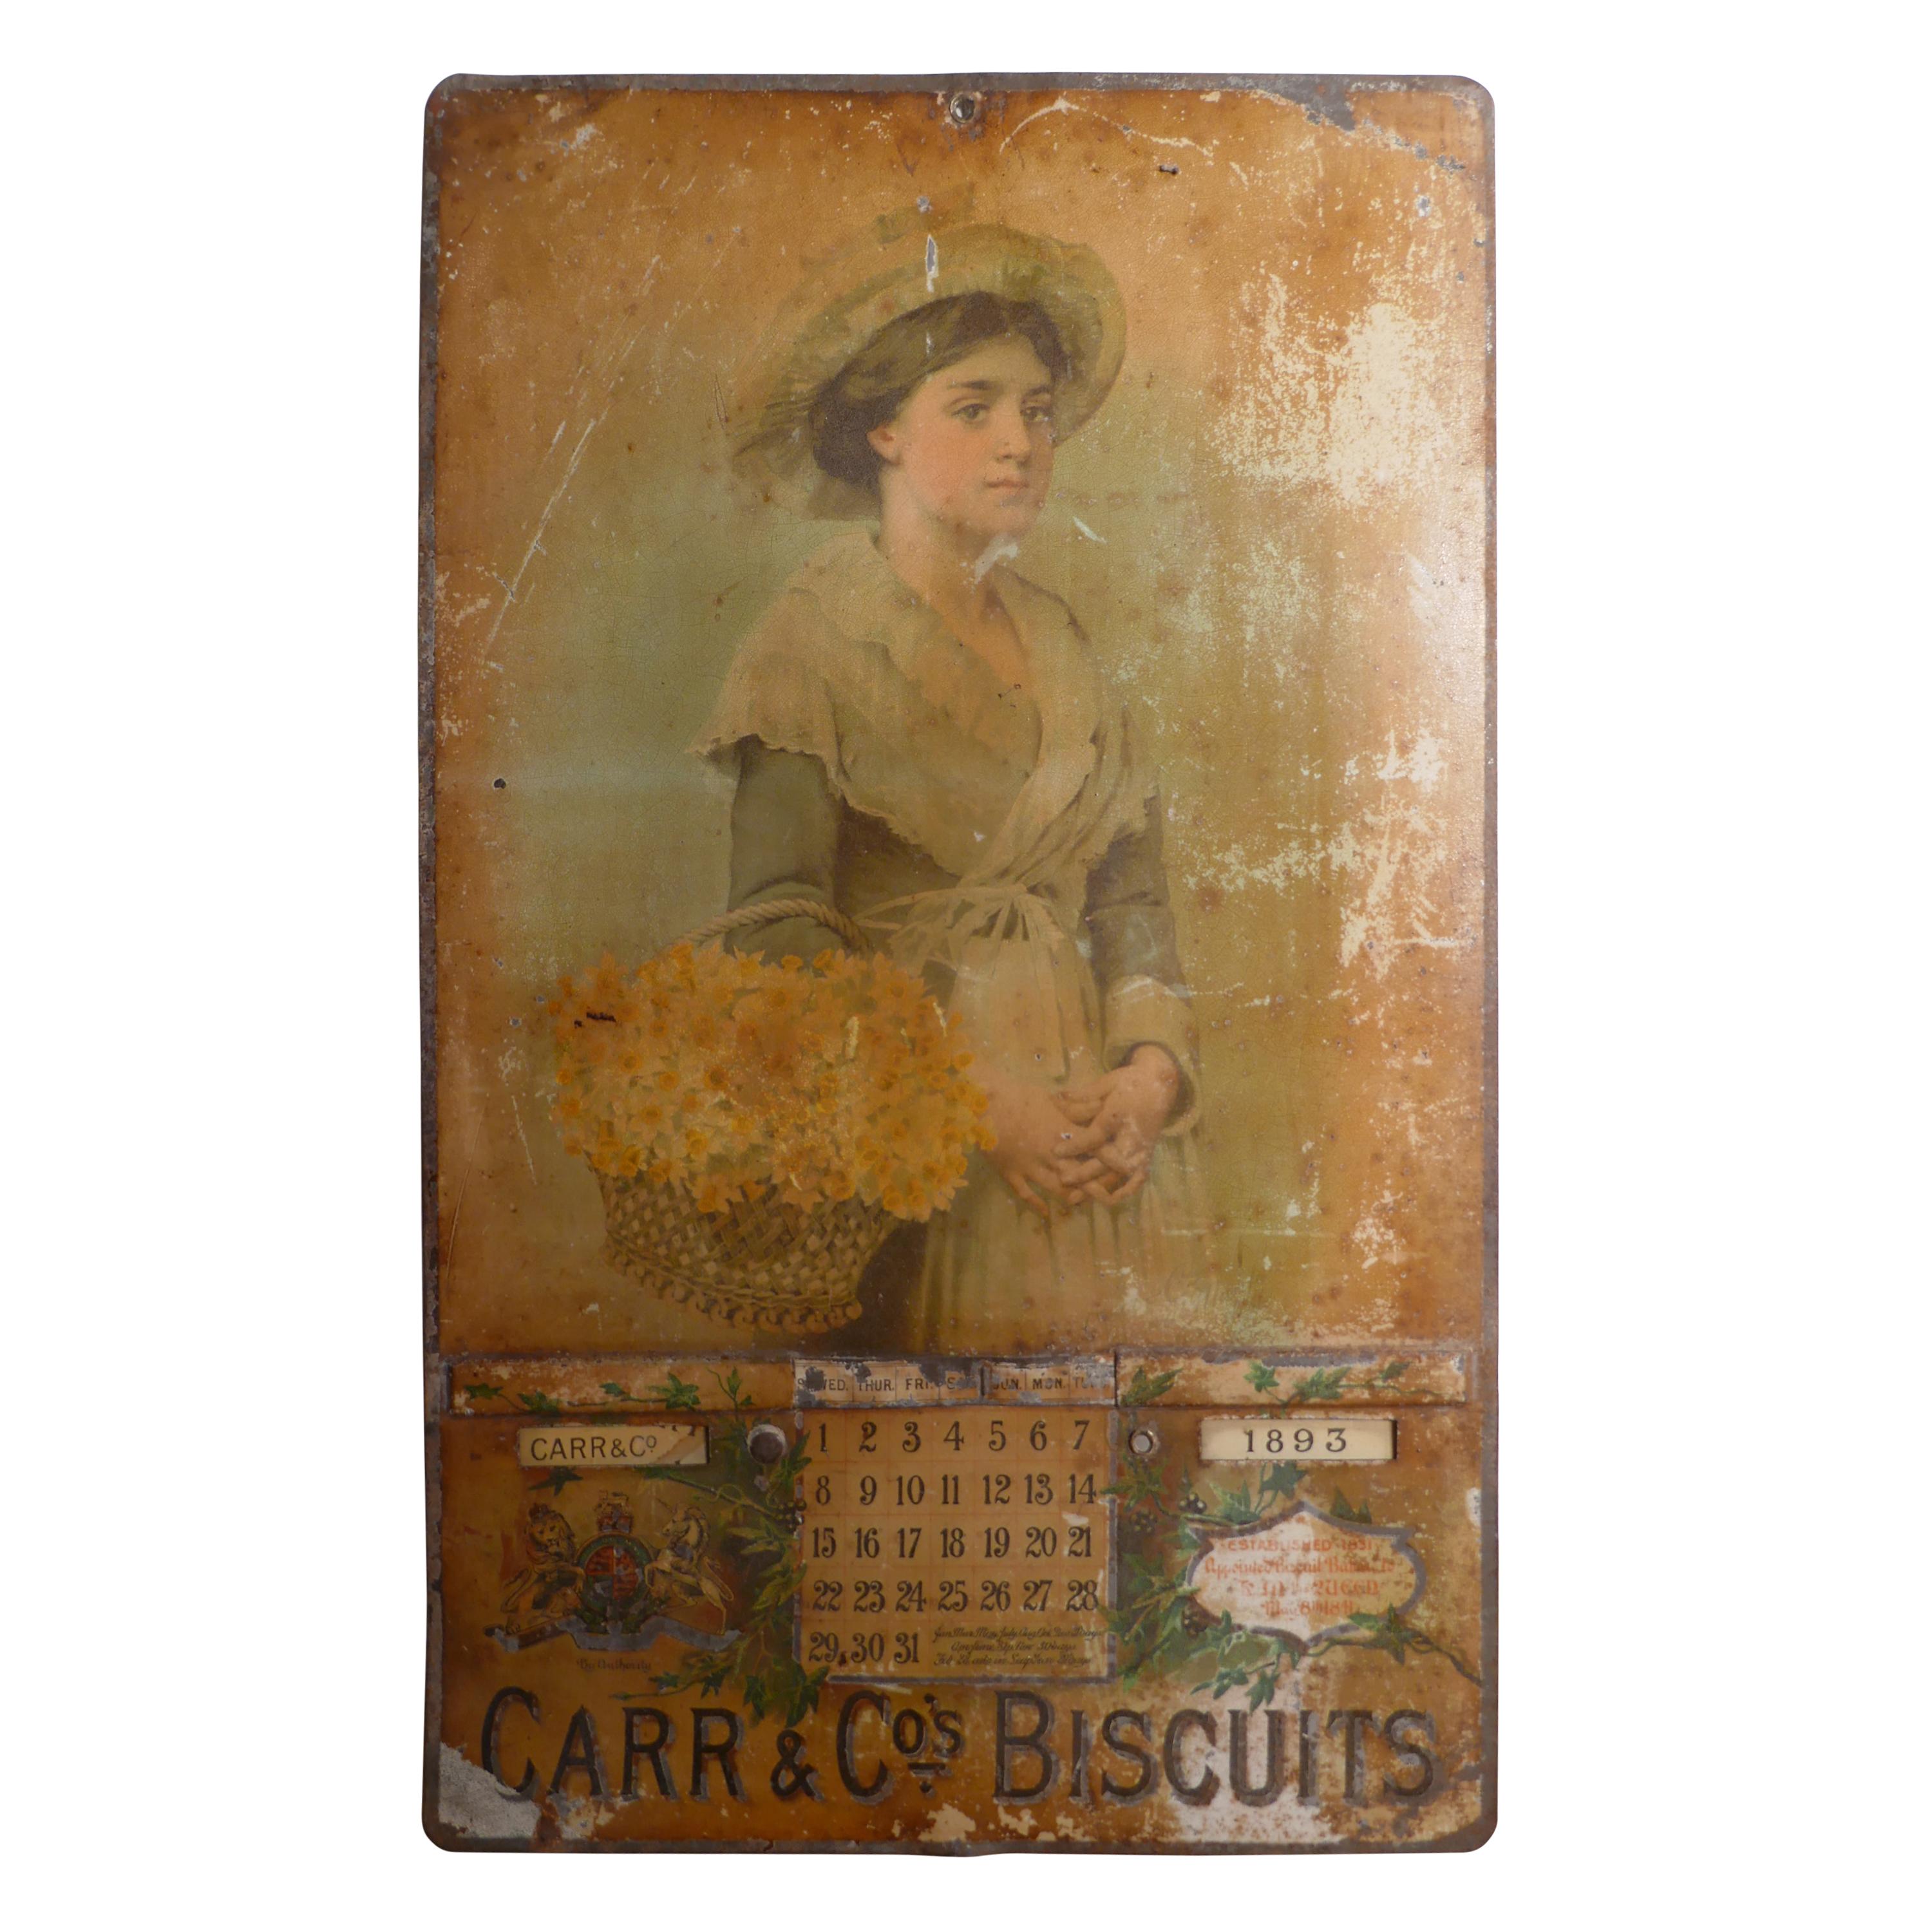 19th Century Tin Plate Perpetual Calendar Advertising Carr’s Biscuits, 1893-1904